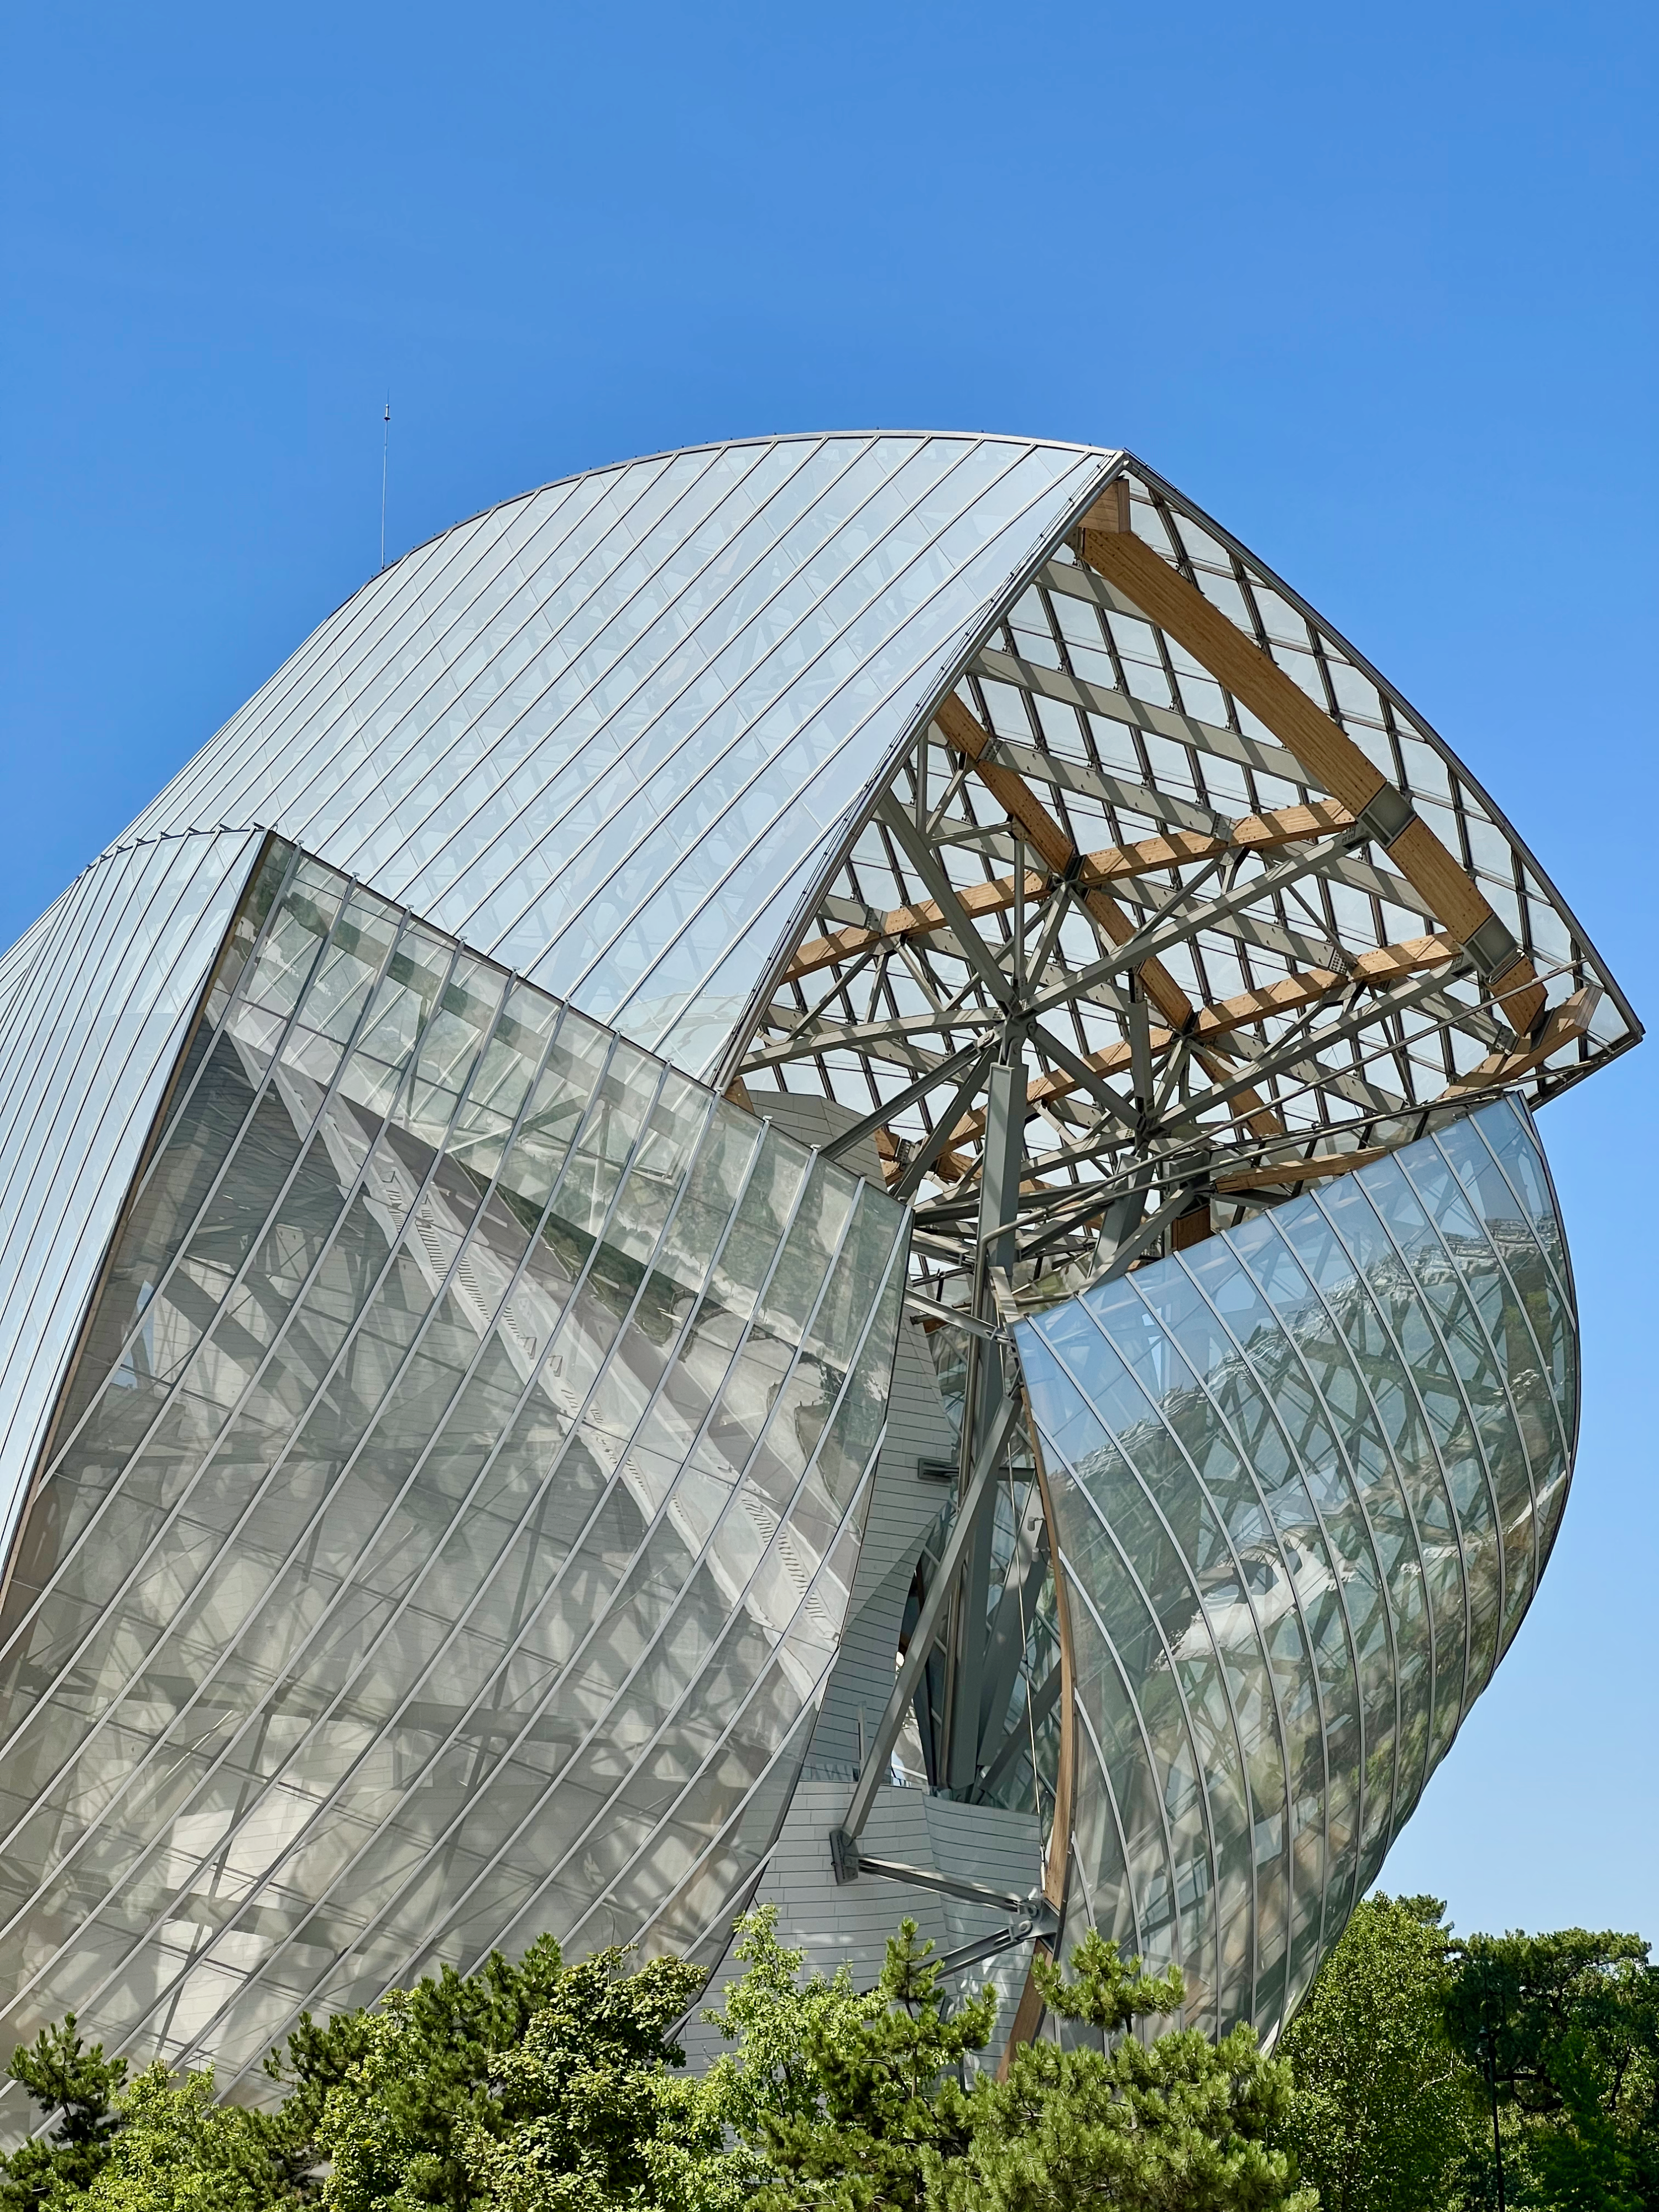 La Fondation Louis Vuitton, designed by Frank Gehry, committed to making art and culture accessible to all